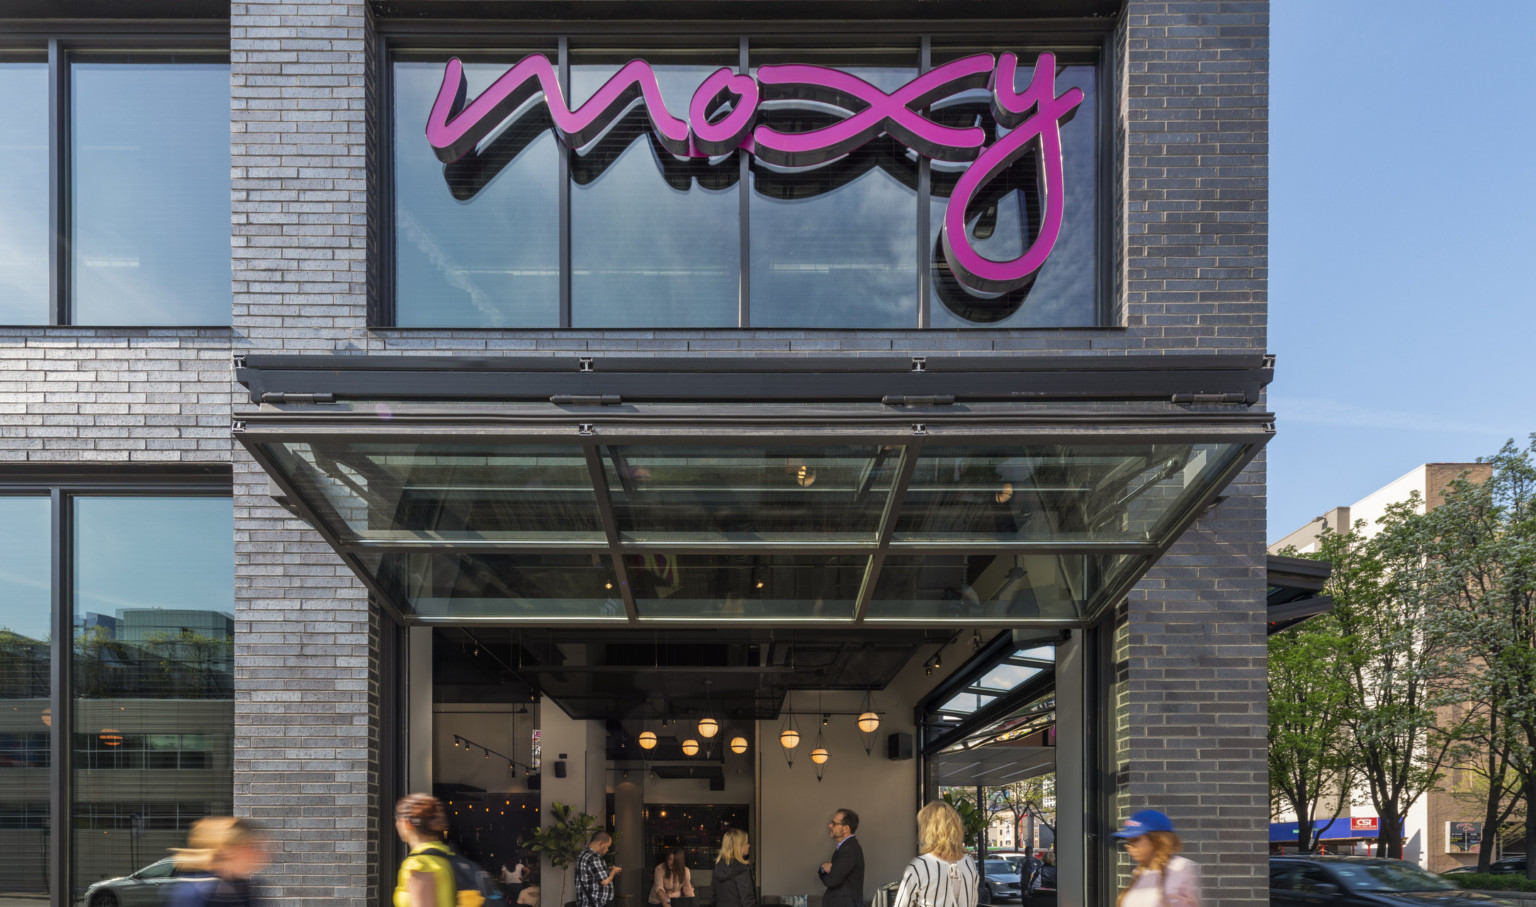 1st floor corner of building with window below pink Moxy sign opened up and out above sidewalk looking into dining area